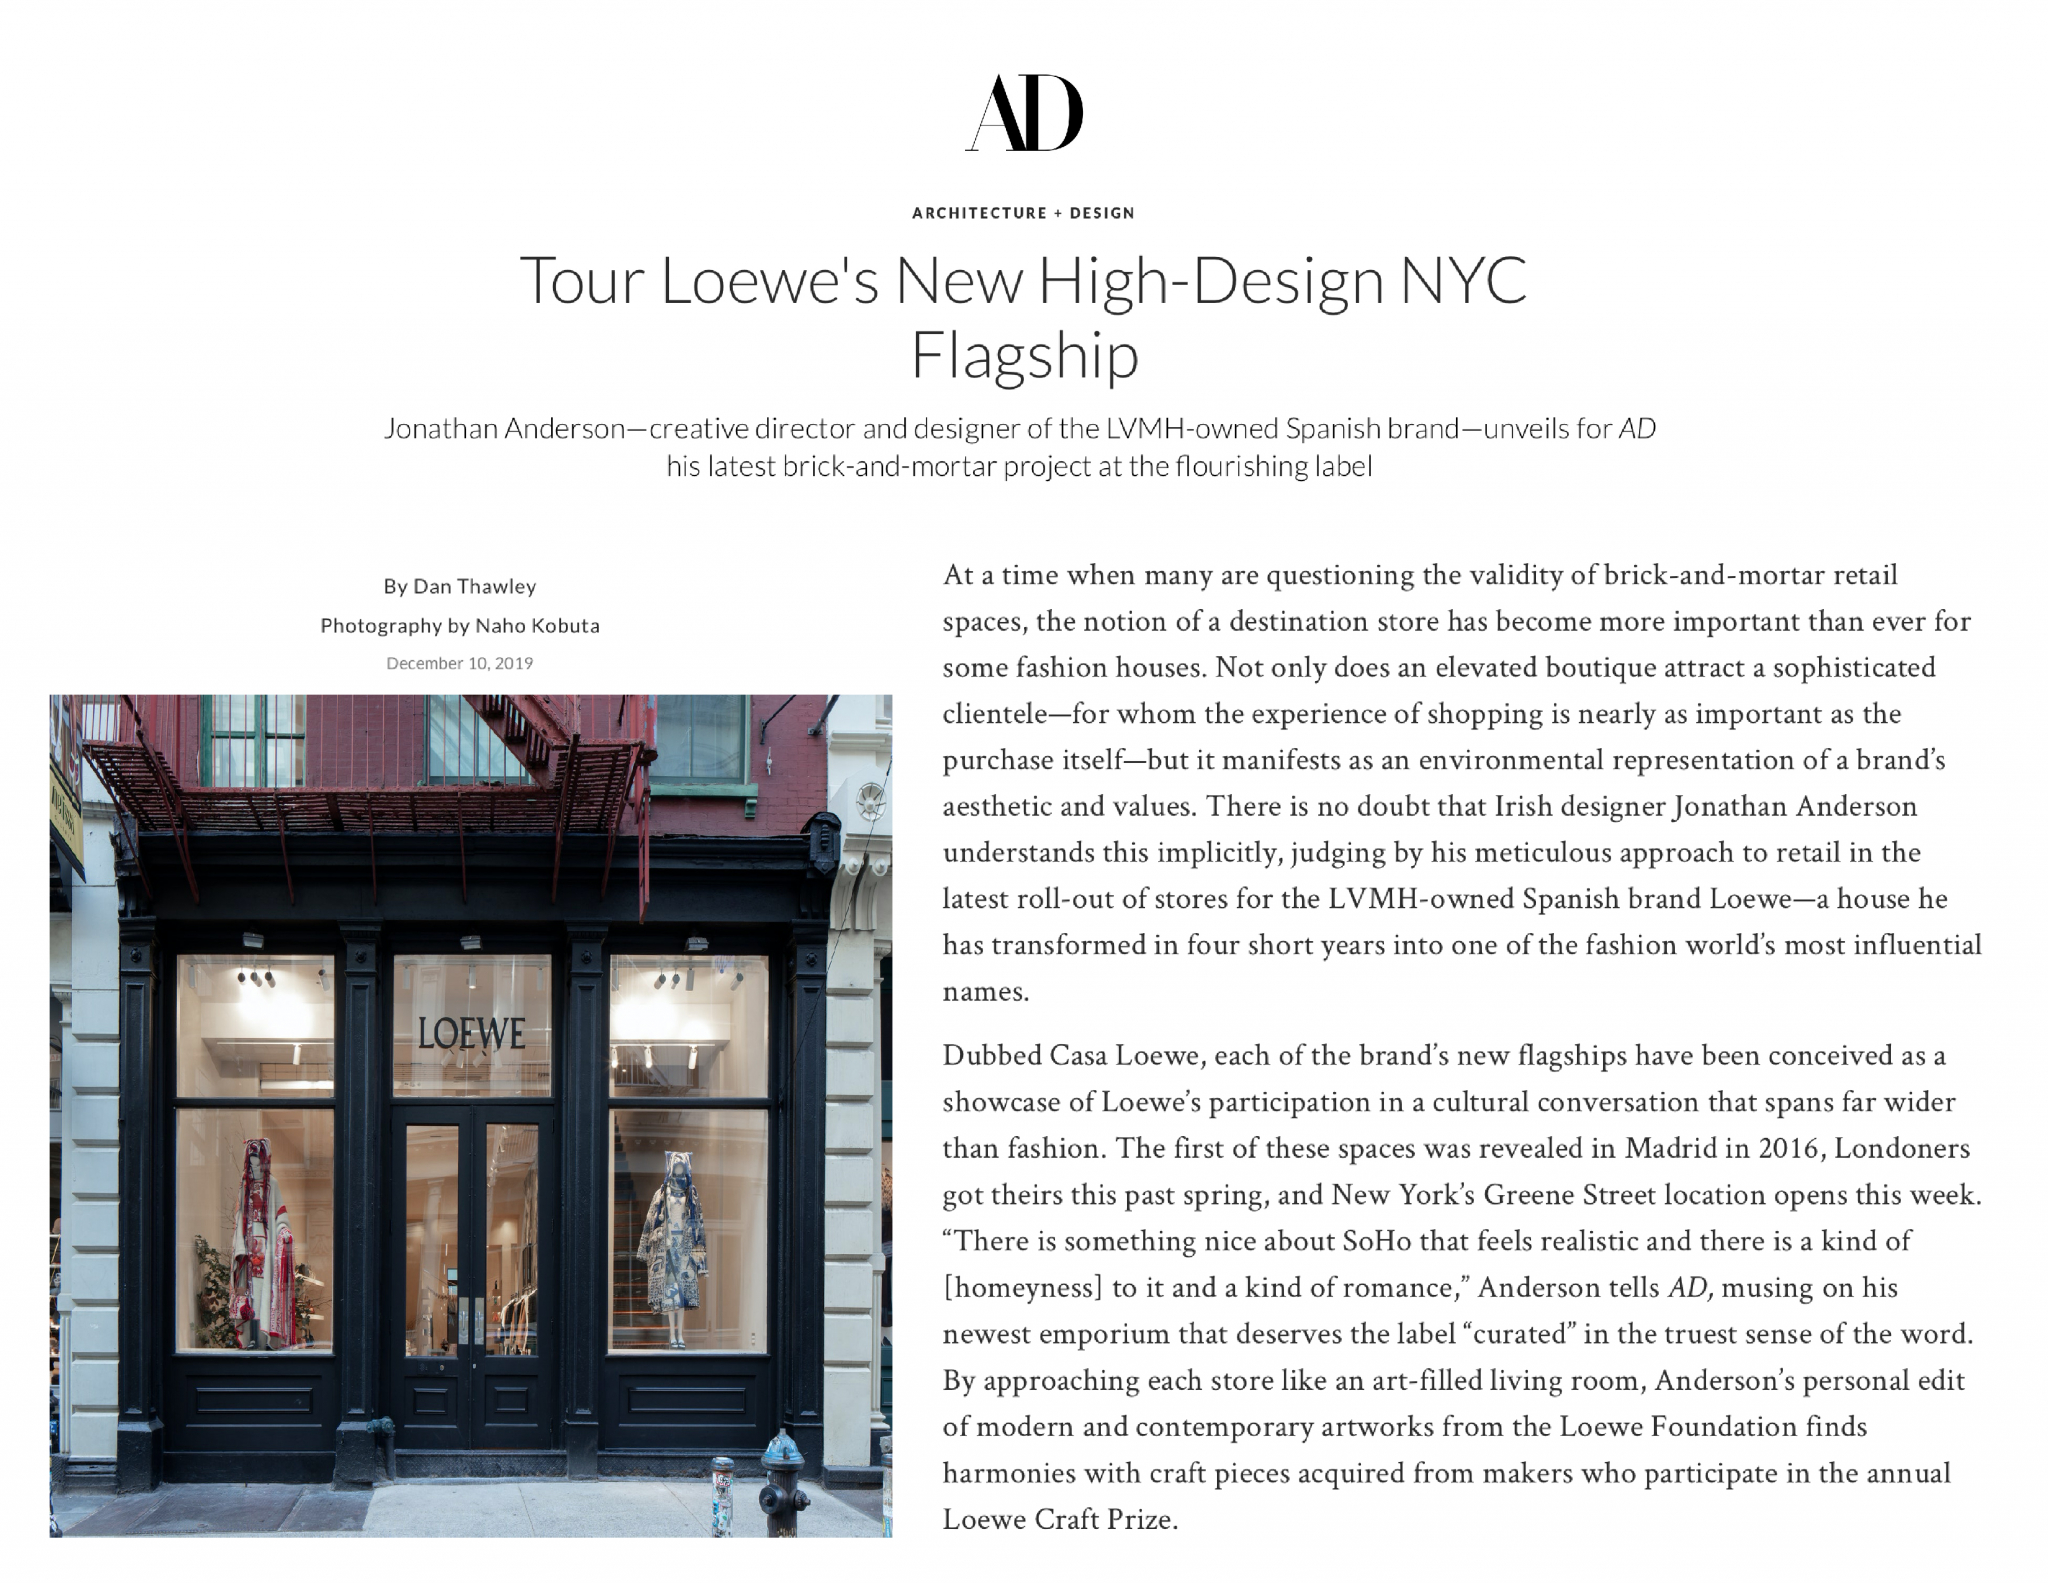 Dan Thawley | Architectural Digest: Loewe's NYC Flagship | 1